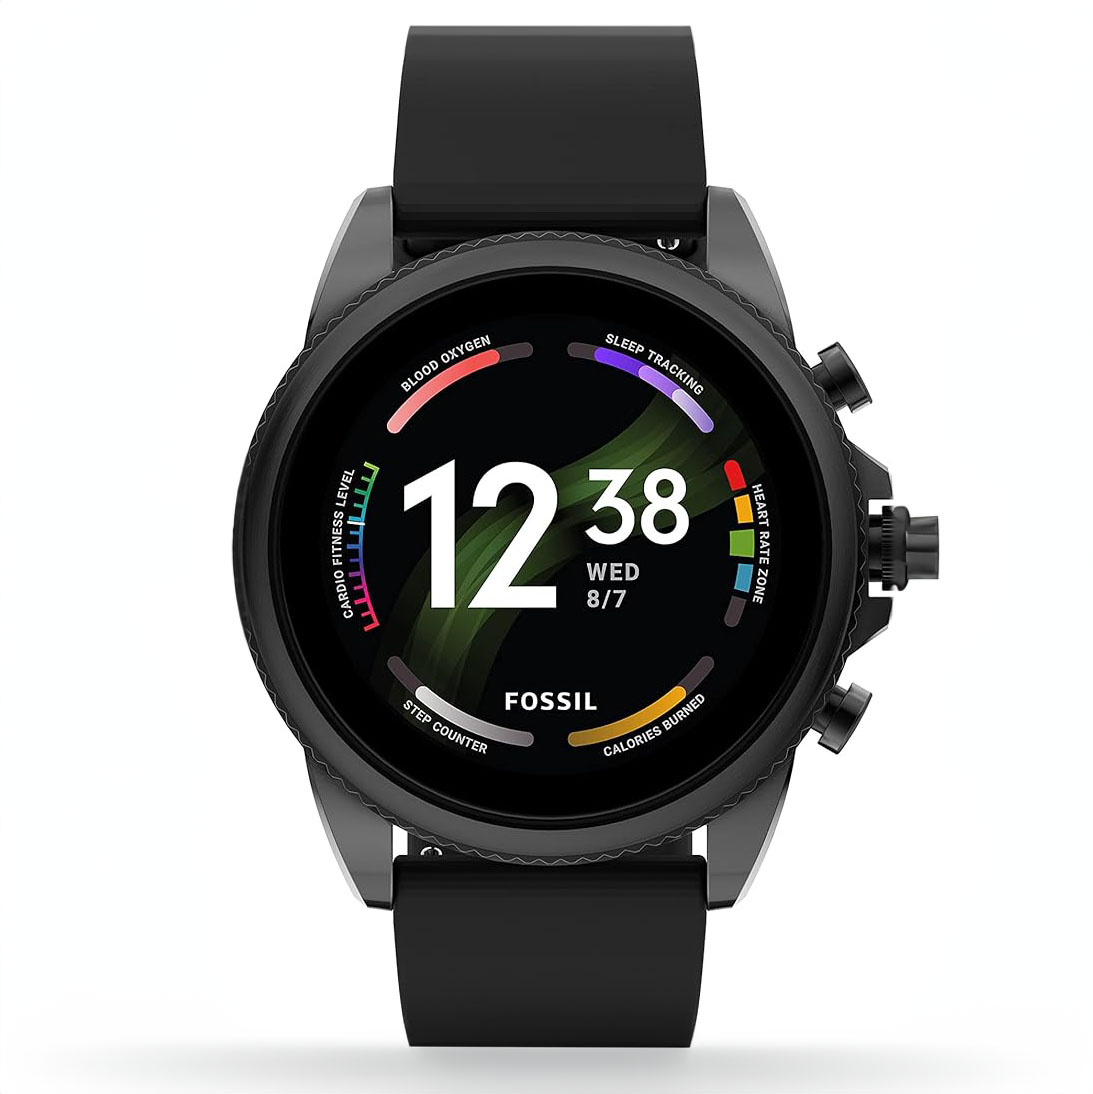 Black Fossil smartwatch with time displayed